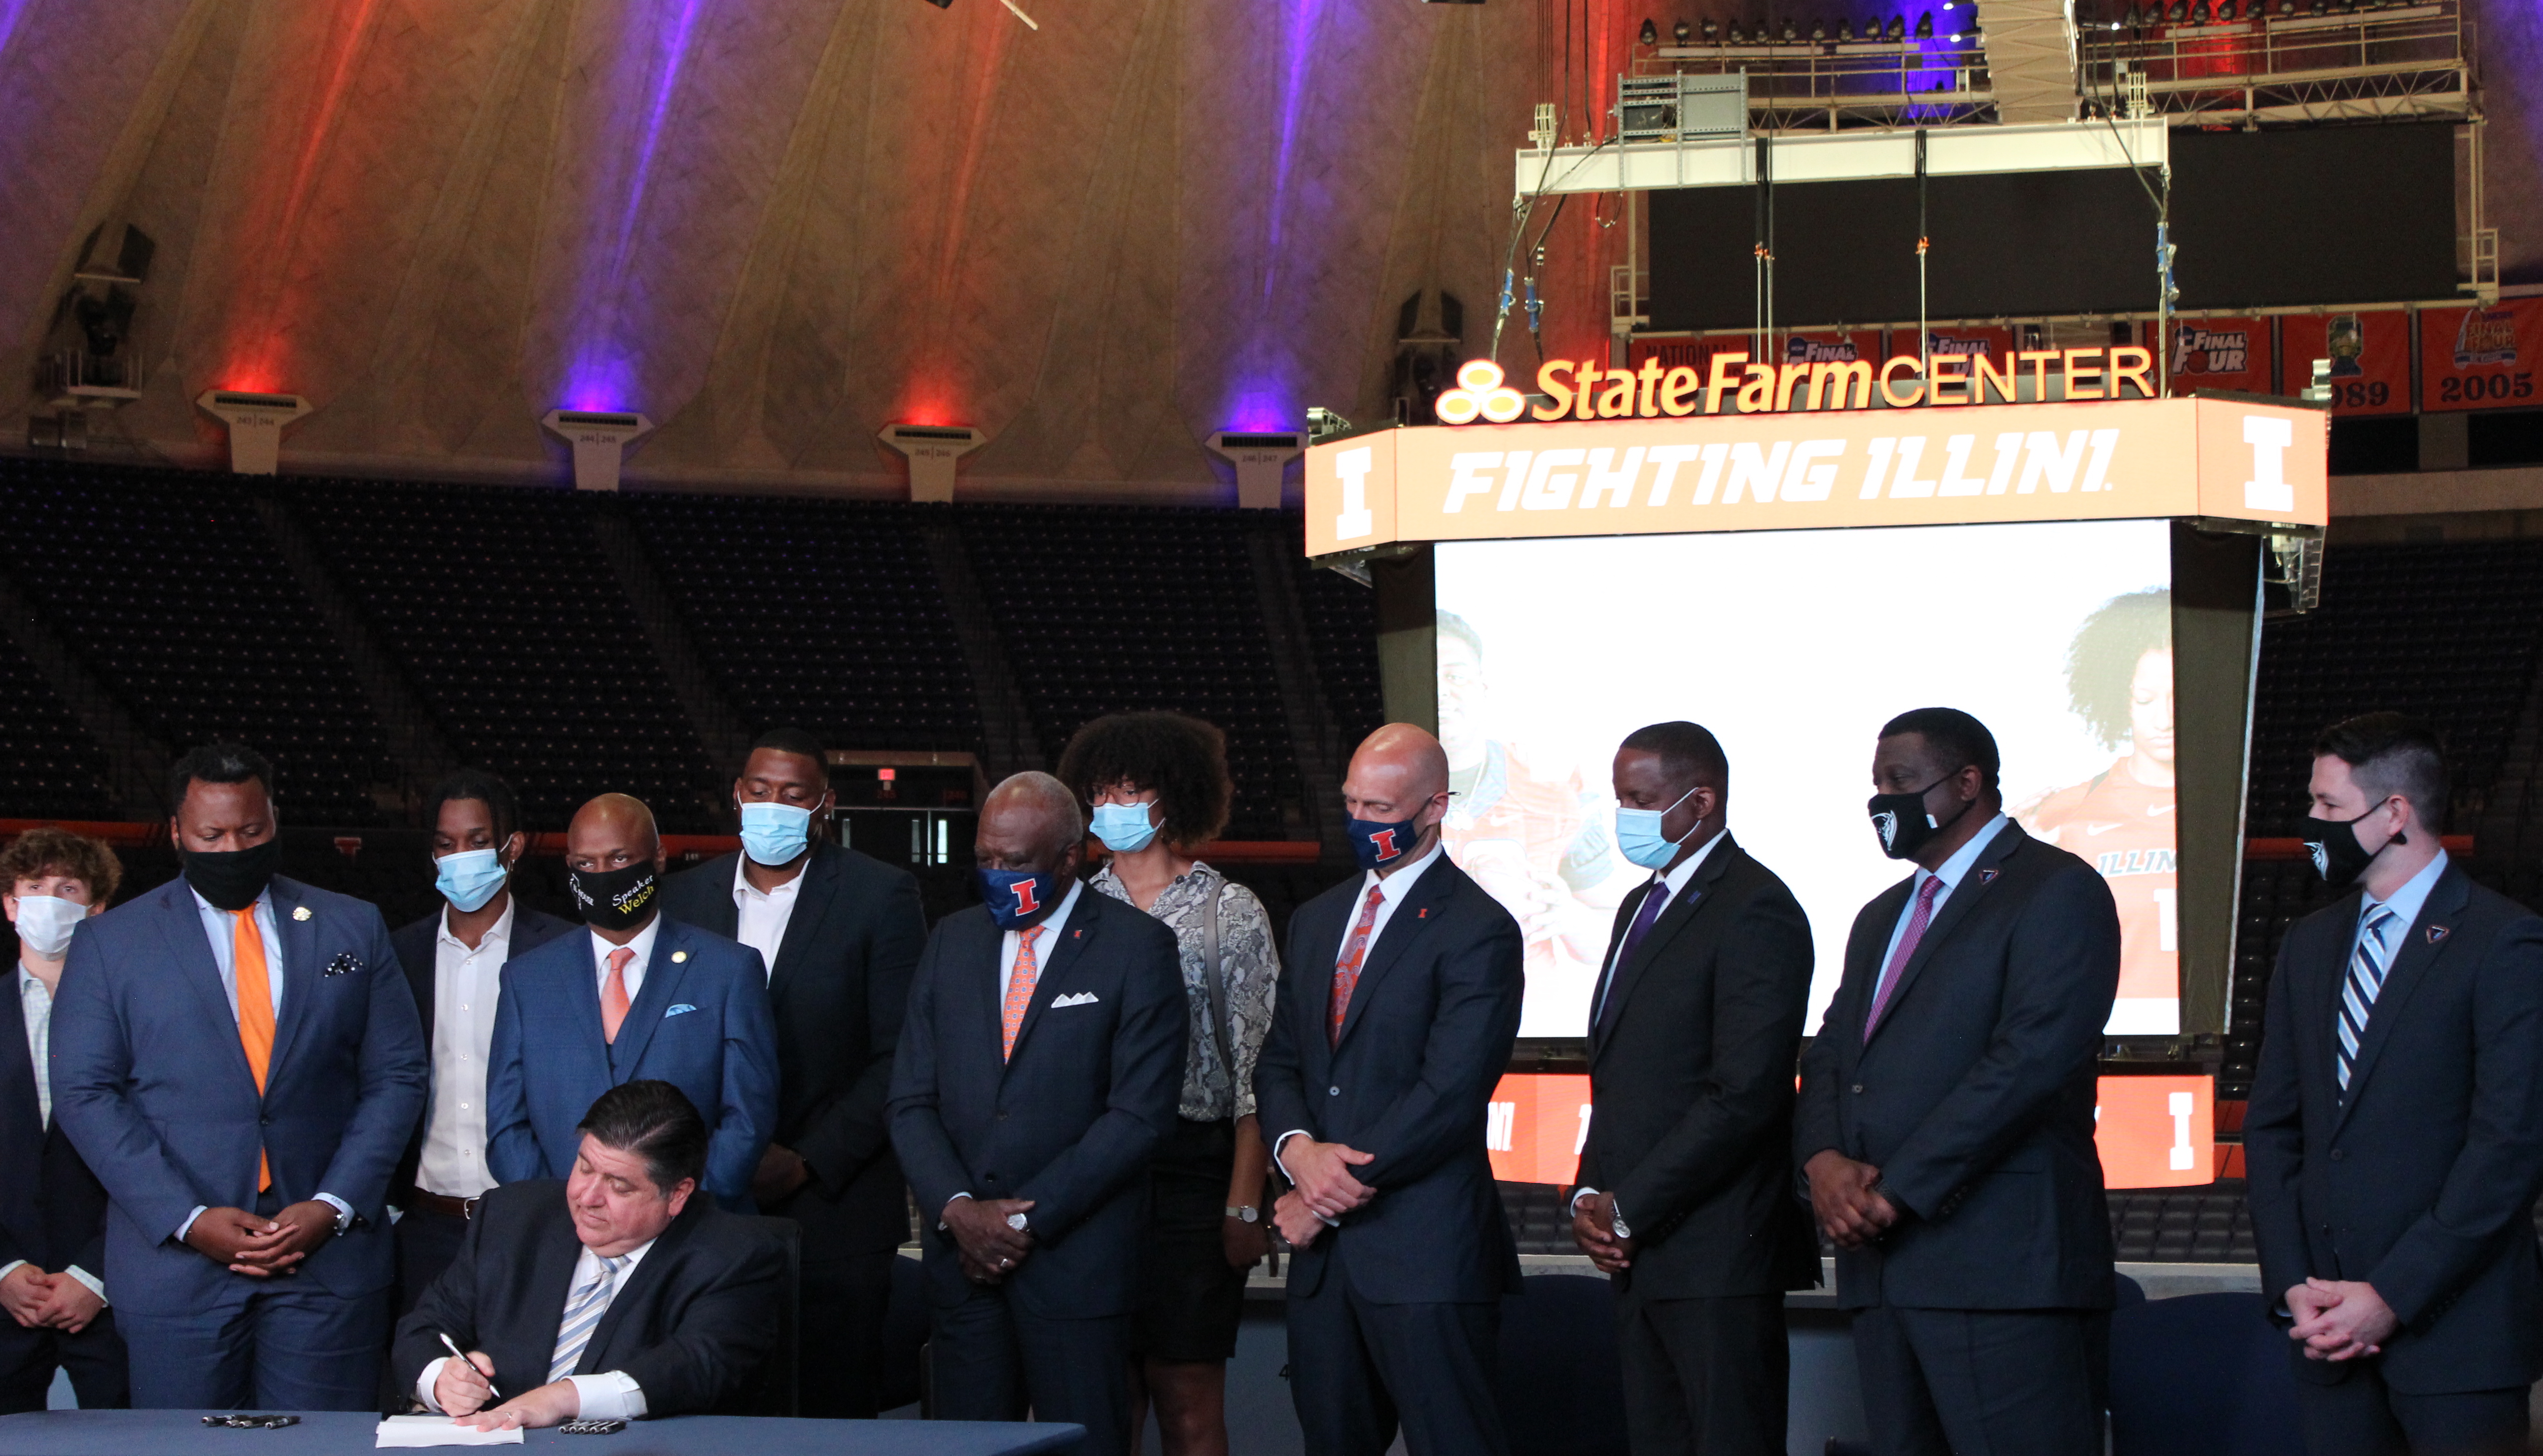 Governor J.B. Pritzker signs the Student-Athlete Endorsement Rights Act at State Farm Center Tuesday. This bill will give Illinois athletes the ability to profit off their name, image and likeness.